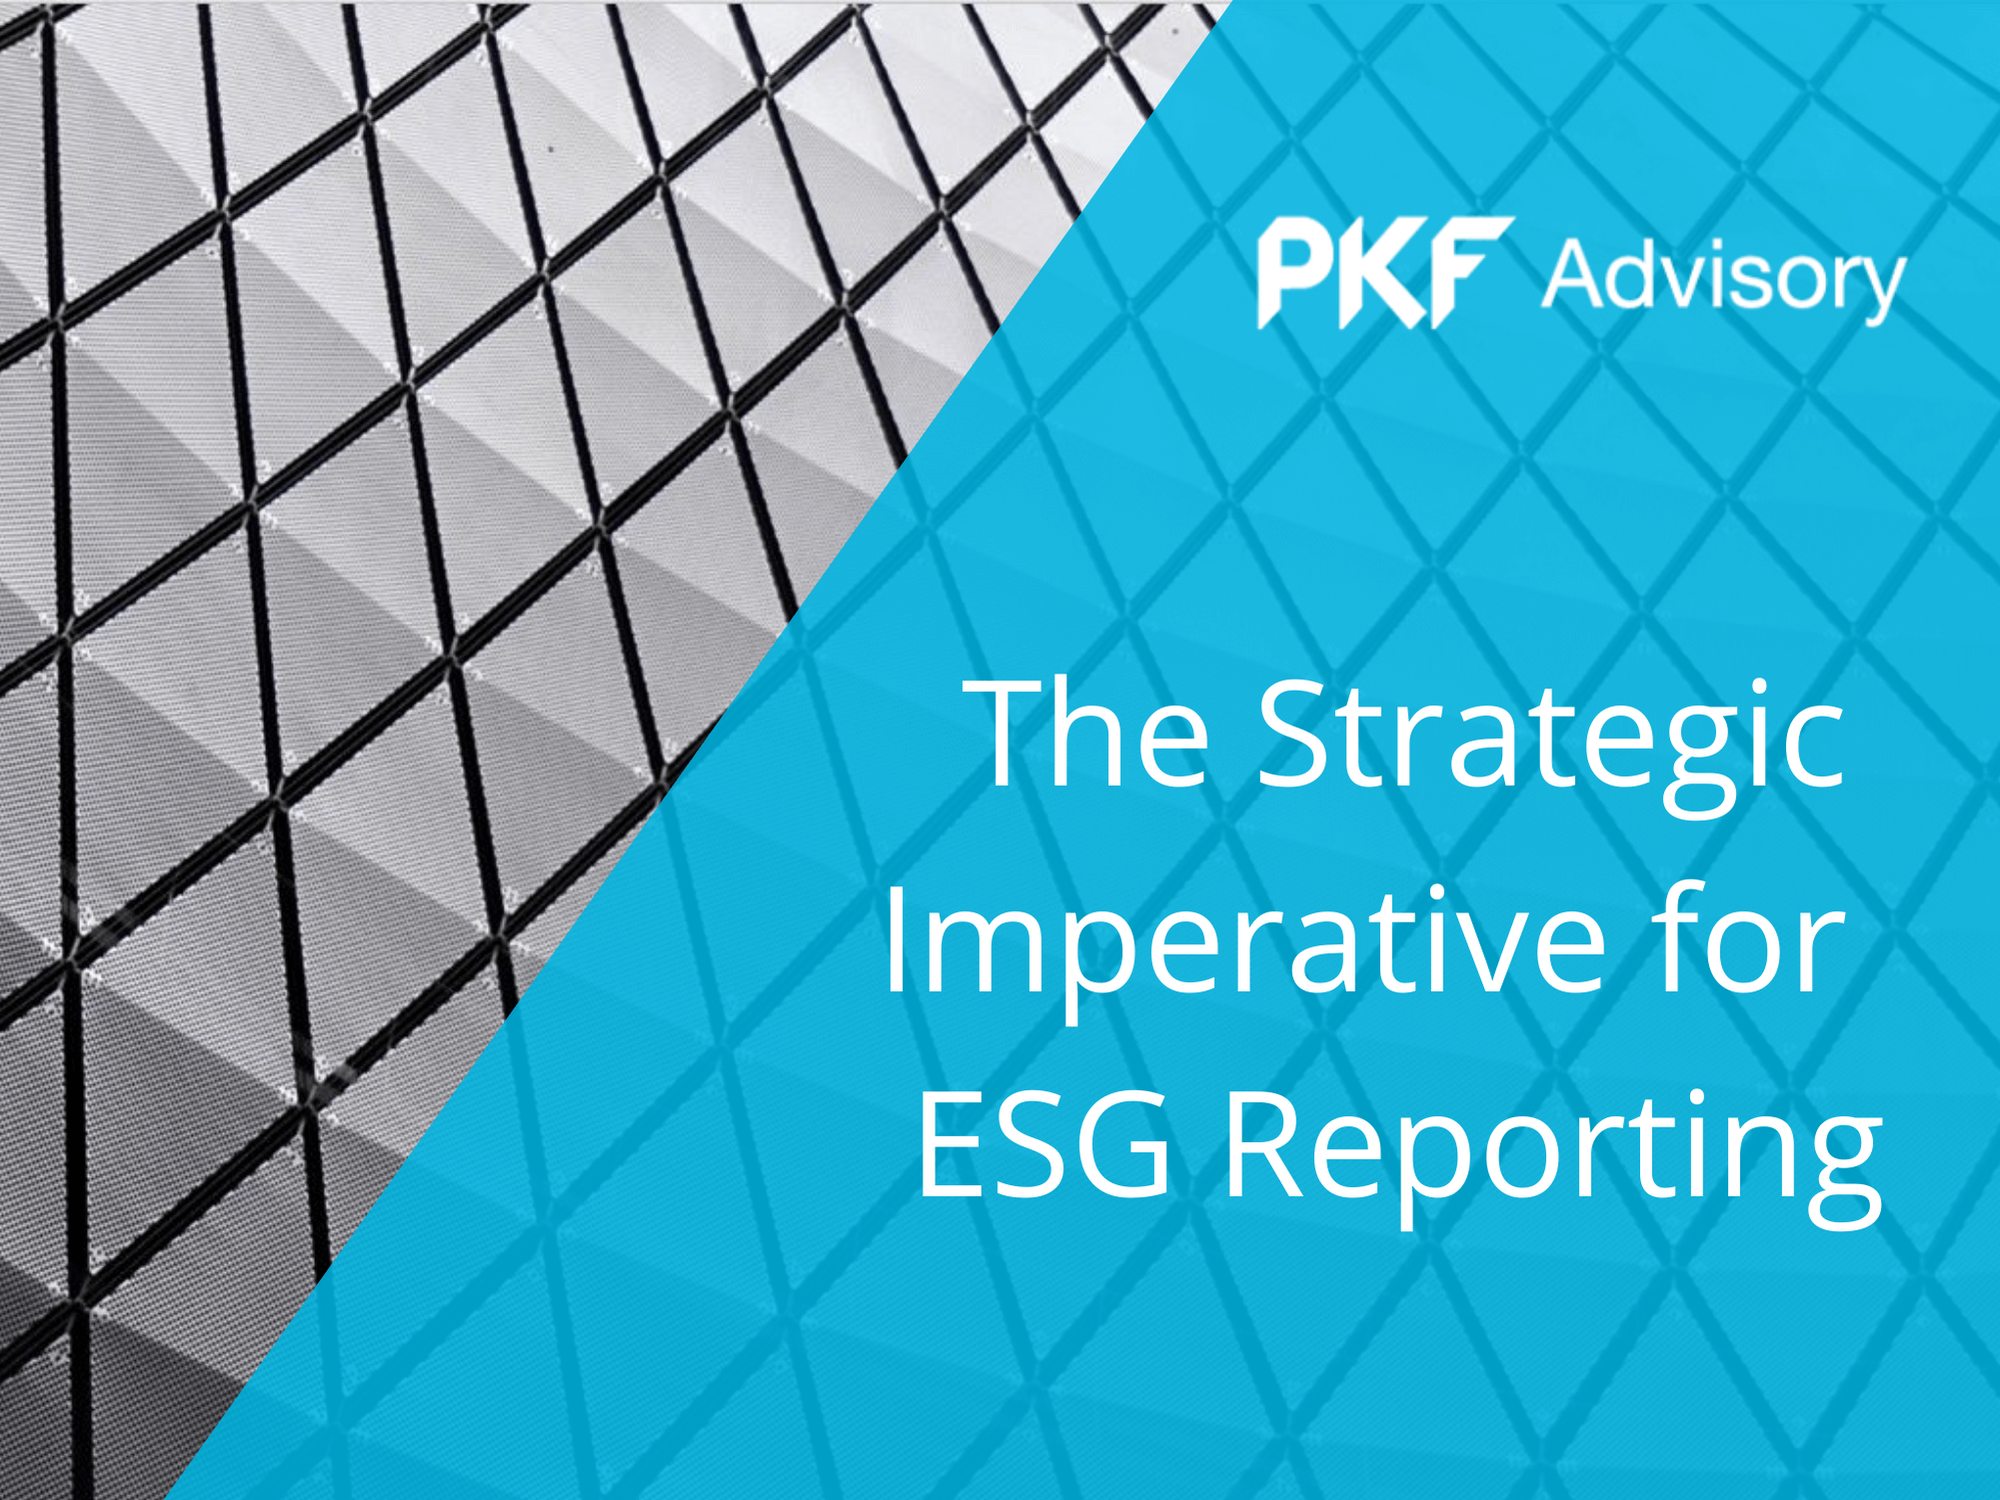 The Strategic Imperative for ESG Reporting